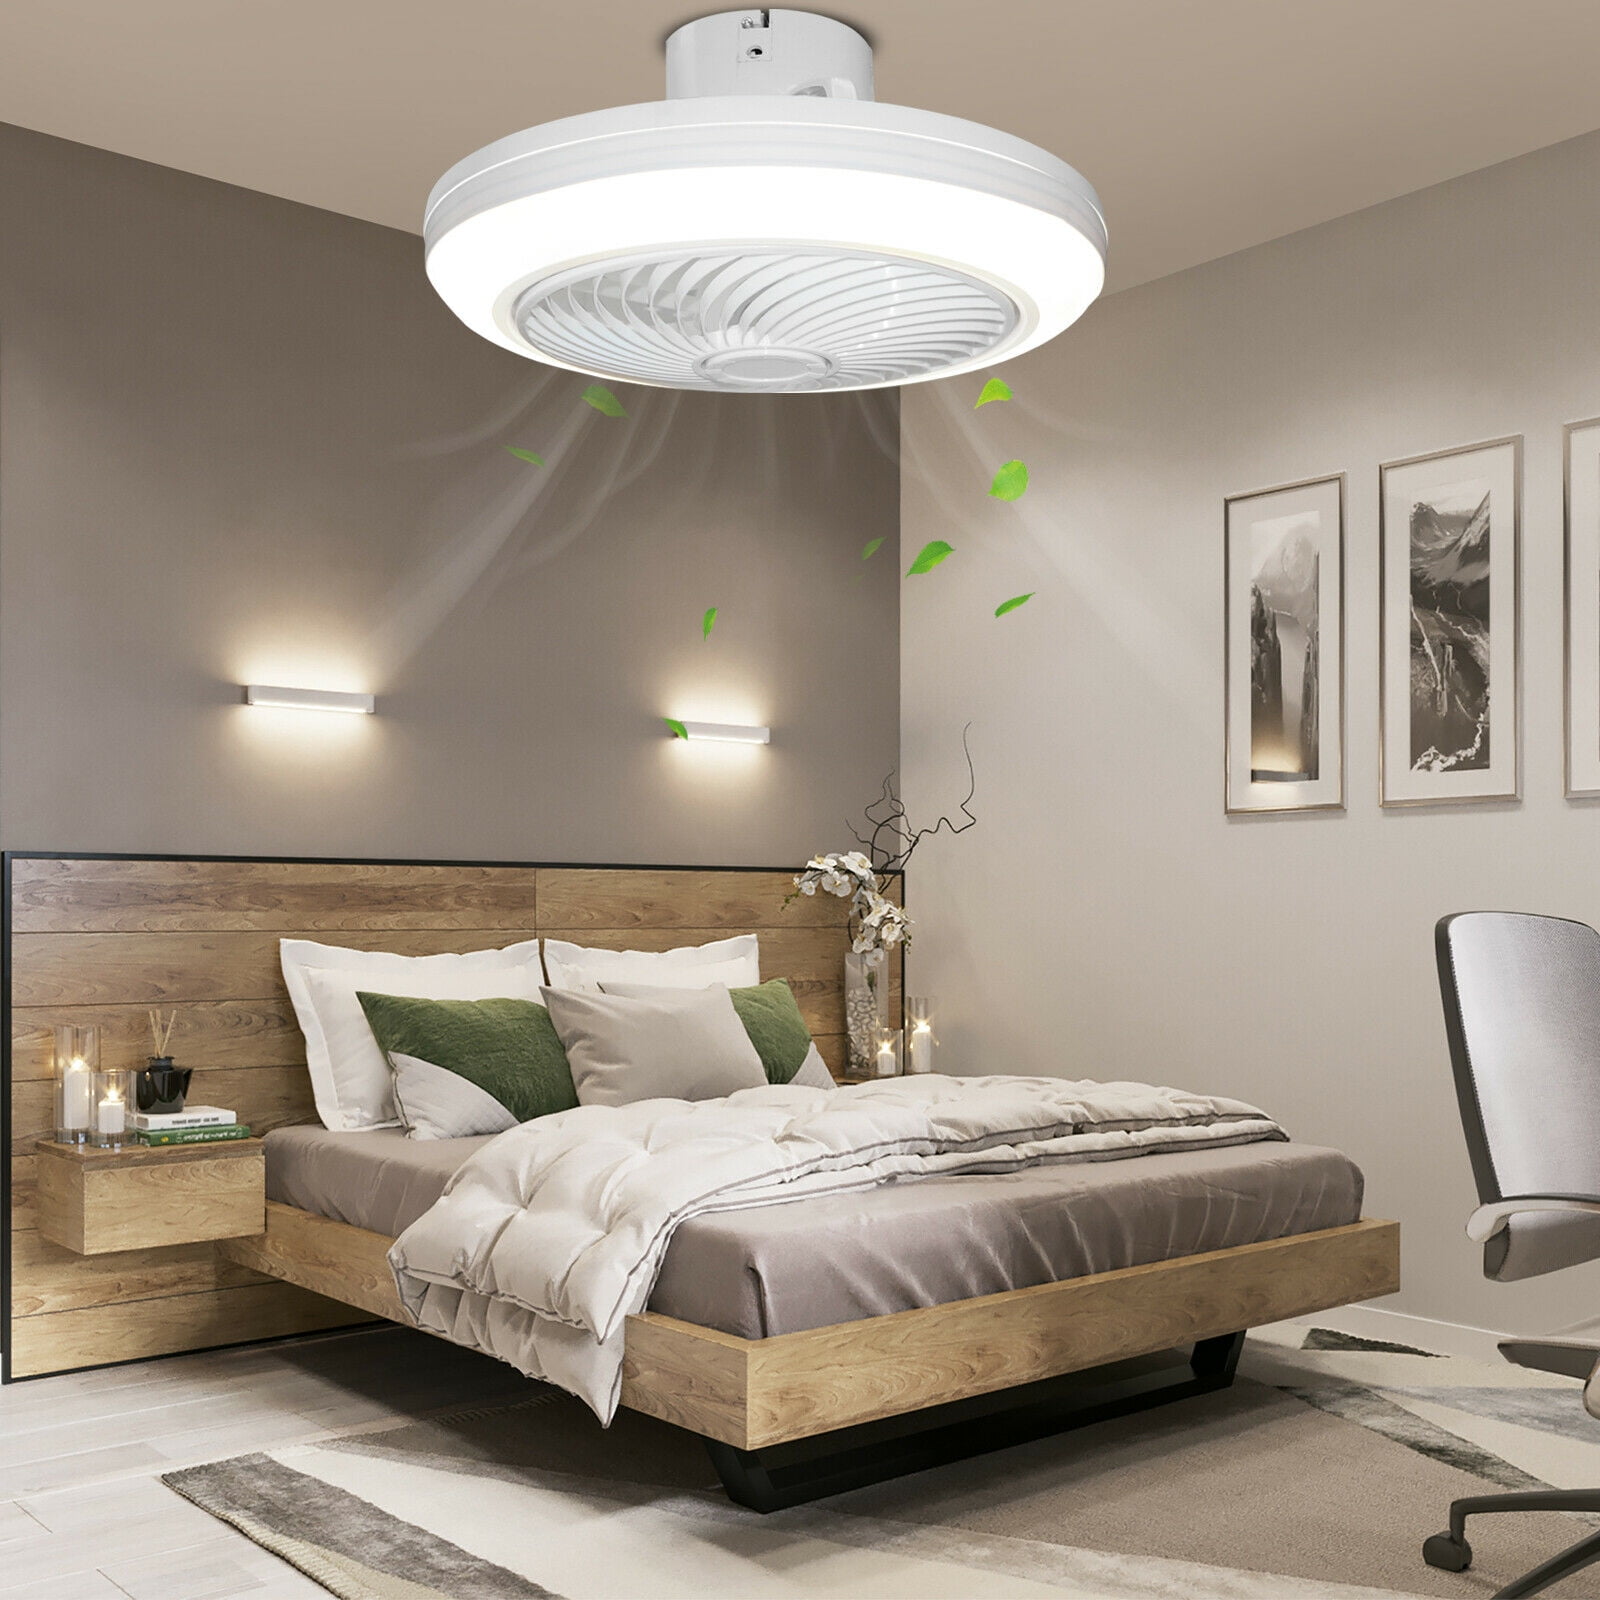 Dimmable 3 Color 3 Speeds Timing Semi Flush Mount Low Profile Fan for Kids Room Bedroom Living Room Modern Bladeless Ceiling Fan Light Indoor Ceiling Fan with Lights and Remote Control